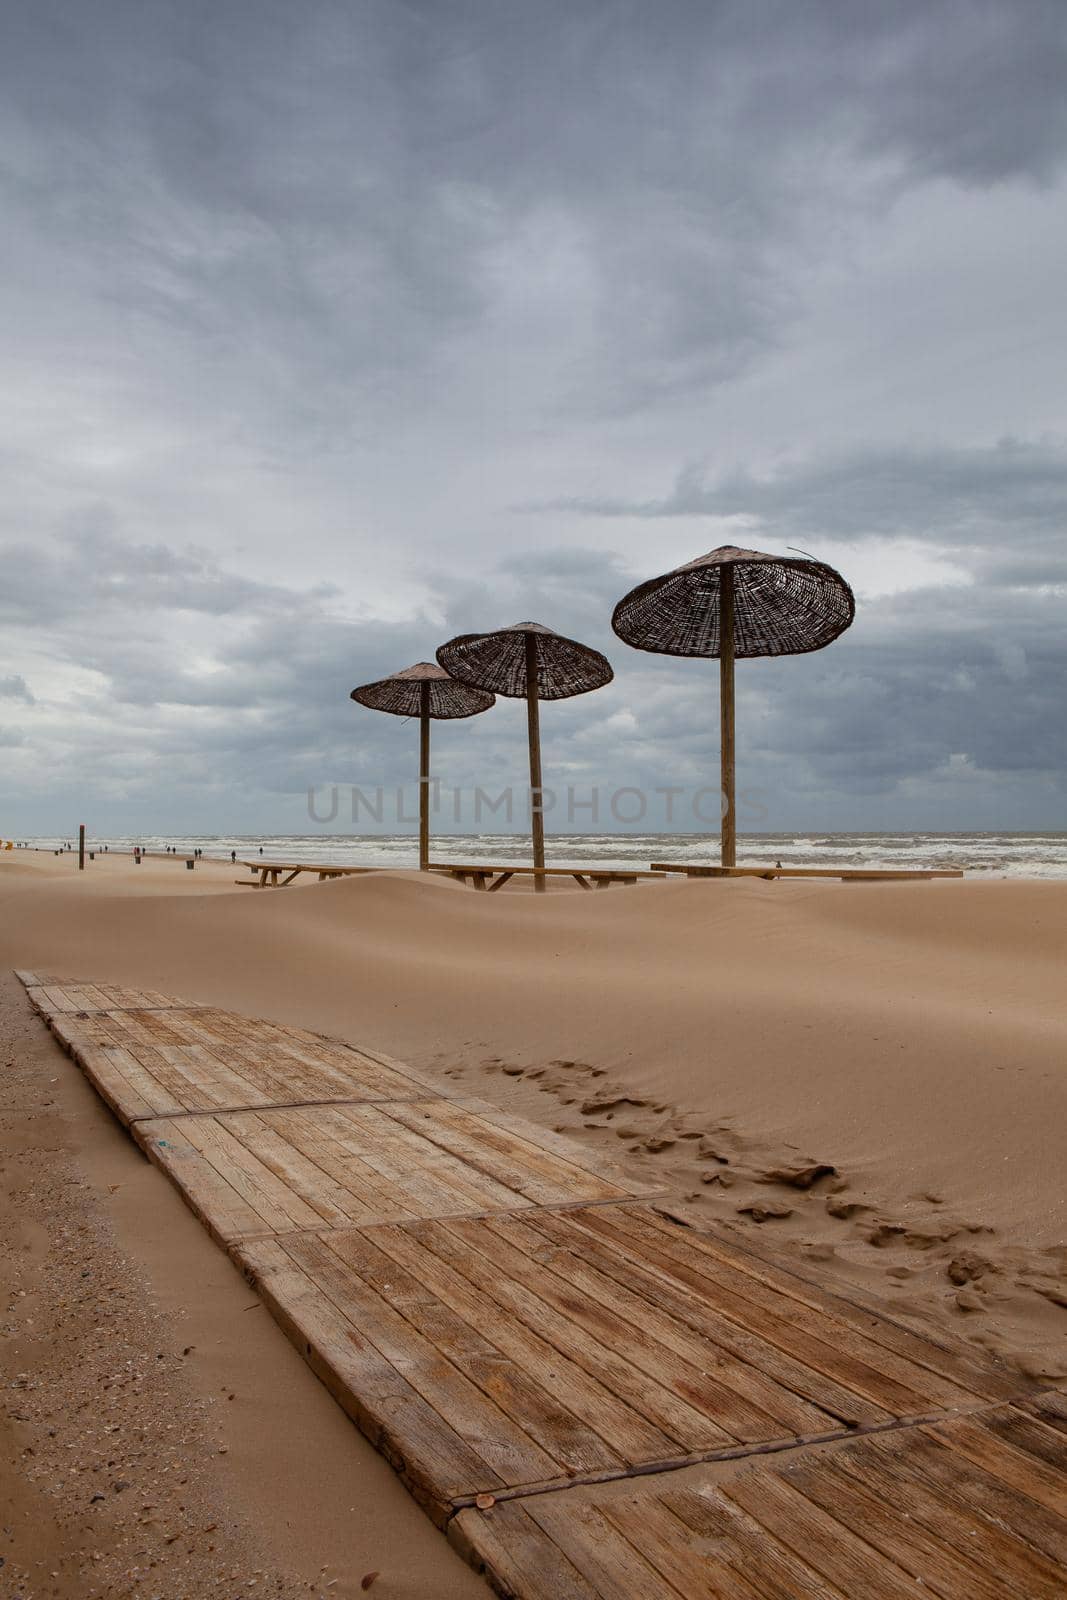 The sand-covered tables on the beach in Egmont aan Zee, Netherlands.  by CaptureLight